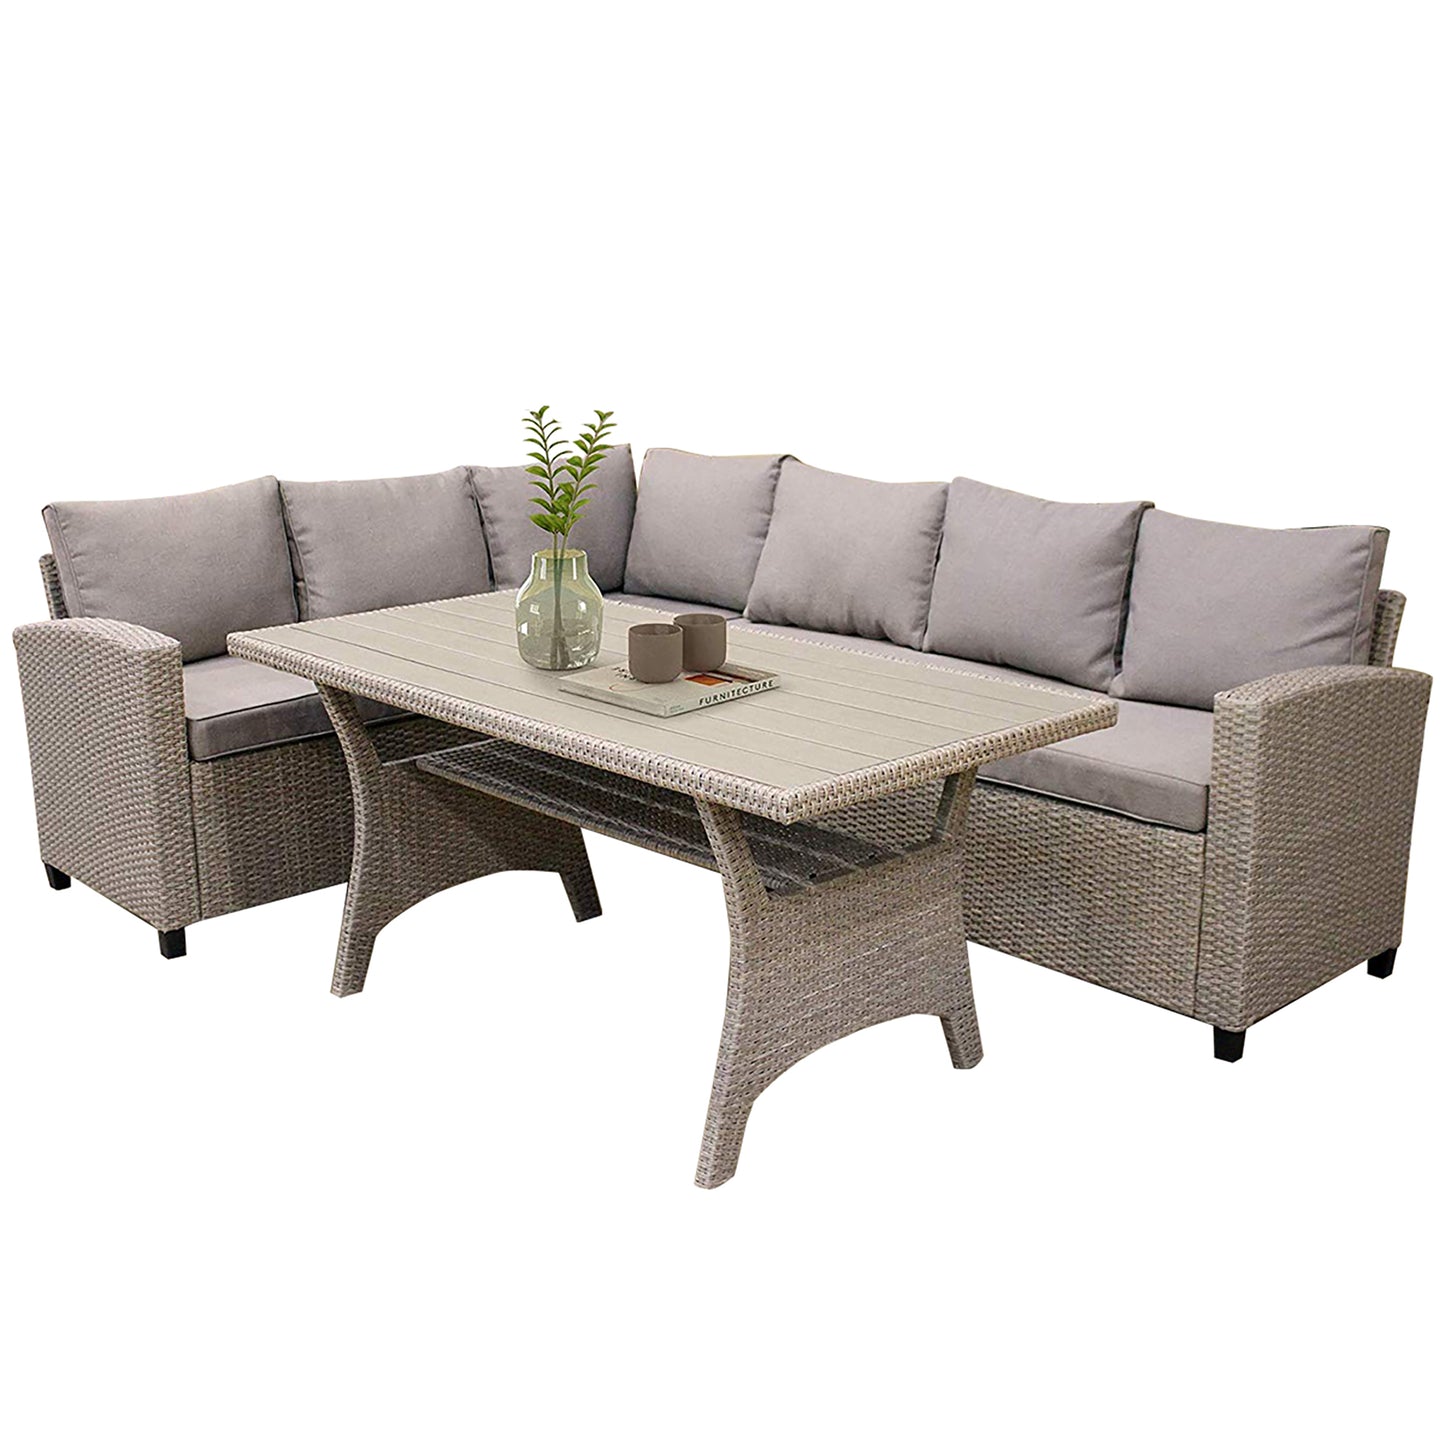 3 Piece Patio Conversation Sets, All-Weather Wicker Outdoor Furniture Sectional Sofa Couch Dining Set with Table, Seat Cushions, Pillows for Garden, Lawn, Backyard, Front Porch, Brown